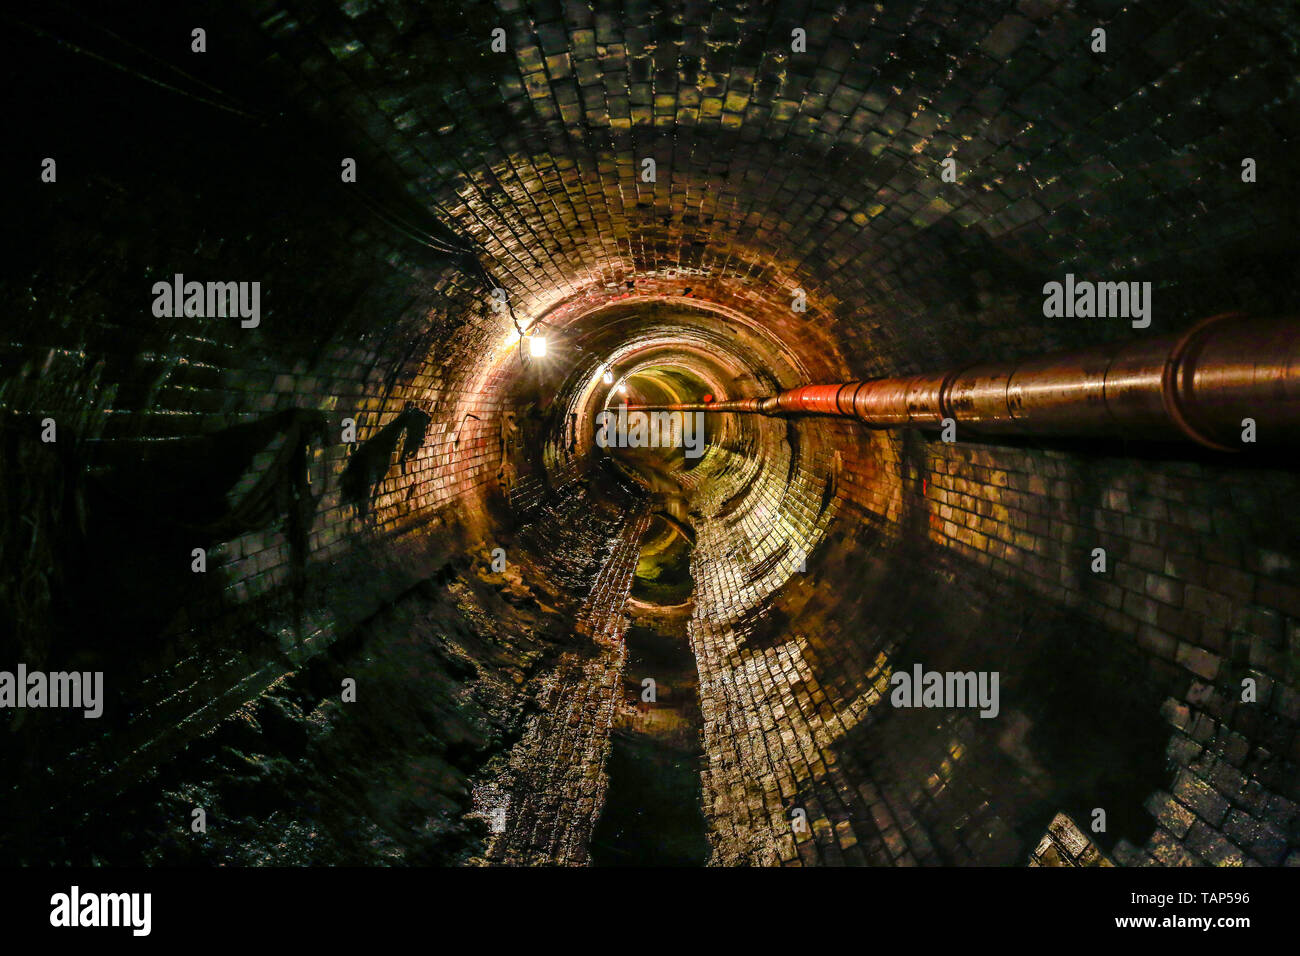 29.04.2019, , North Rhine-Westphalia, Germany - Theme picture sewer network transmission, old, brick sewer in need of renovation. Canal transmission m Stock Photo